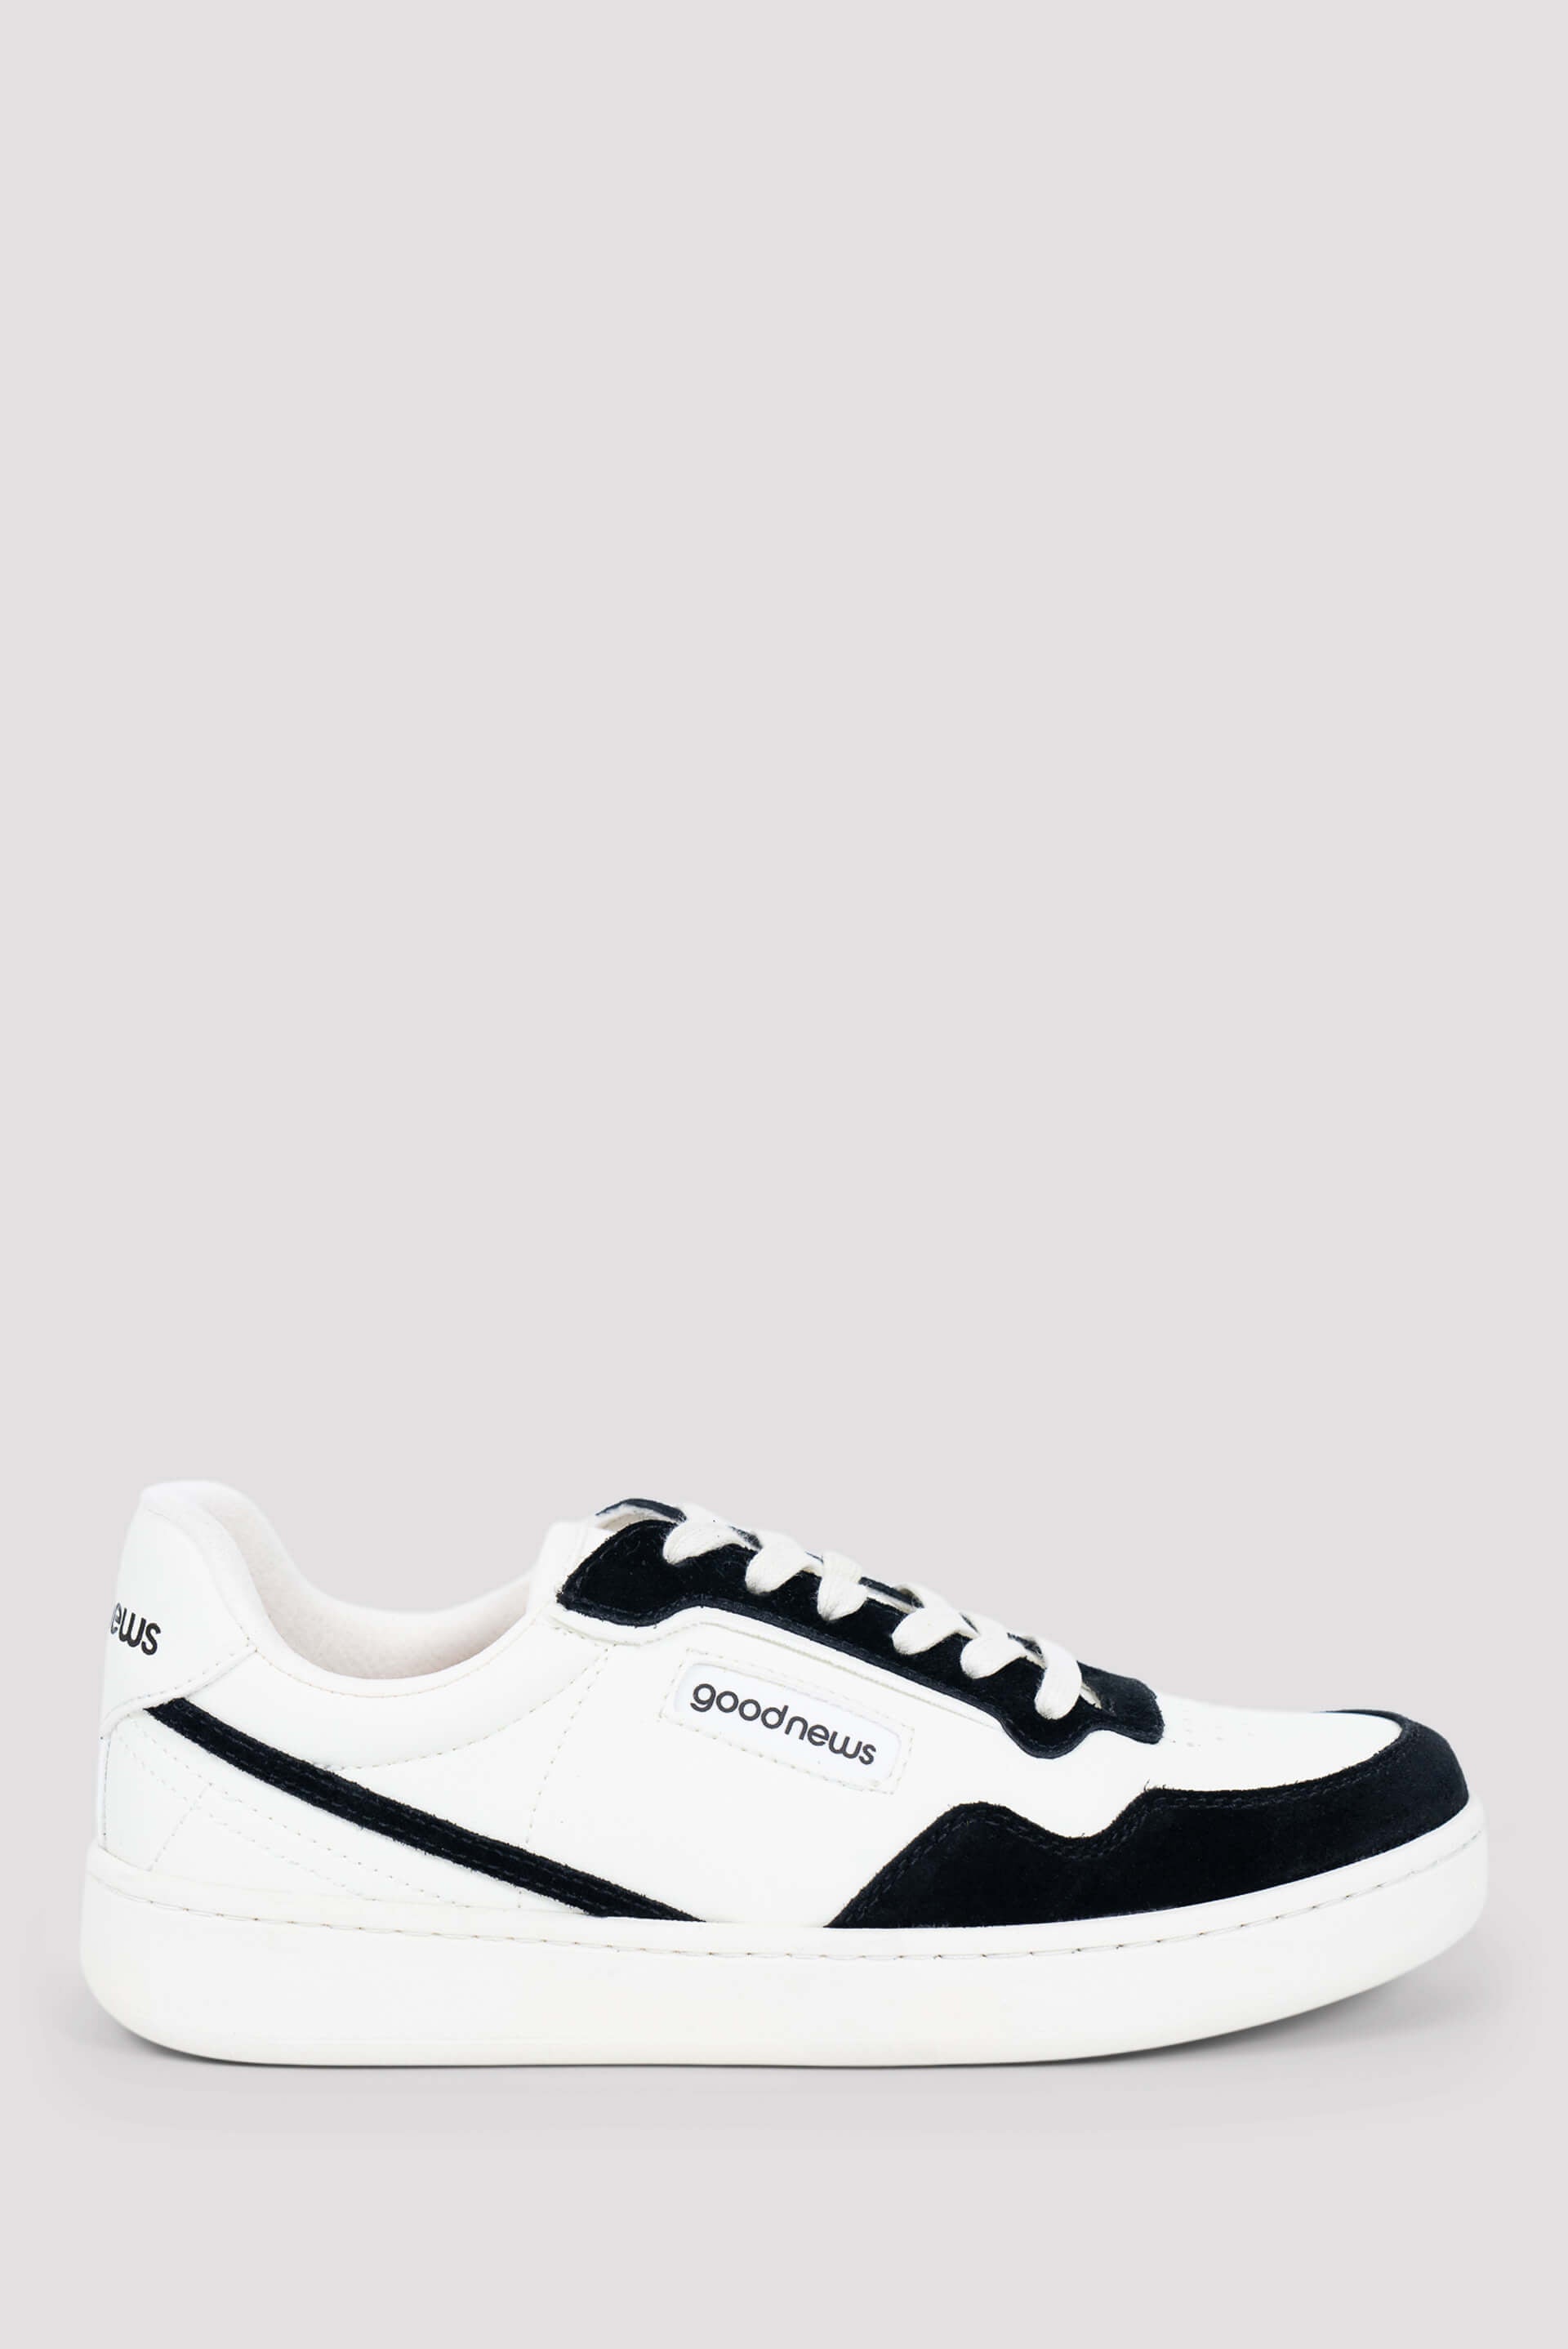 Discover 177+ good white sneakers best